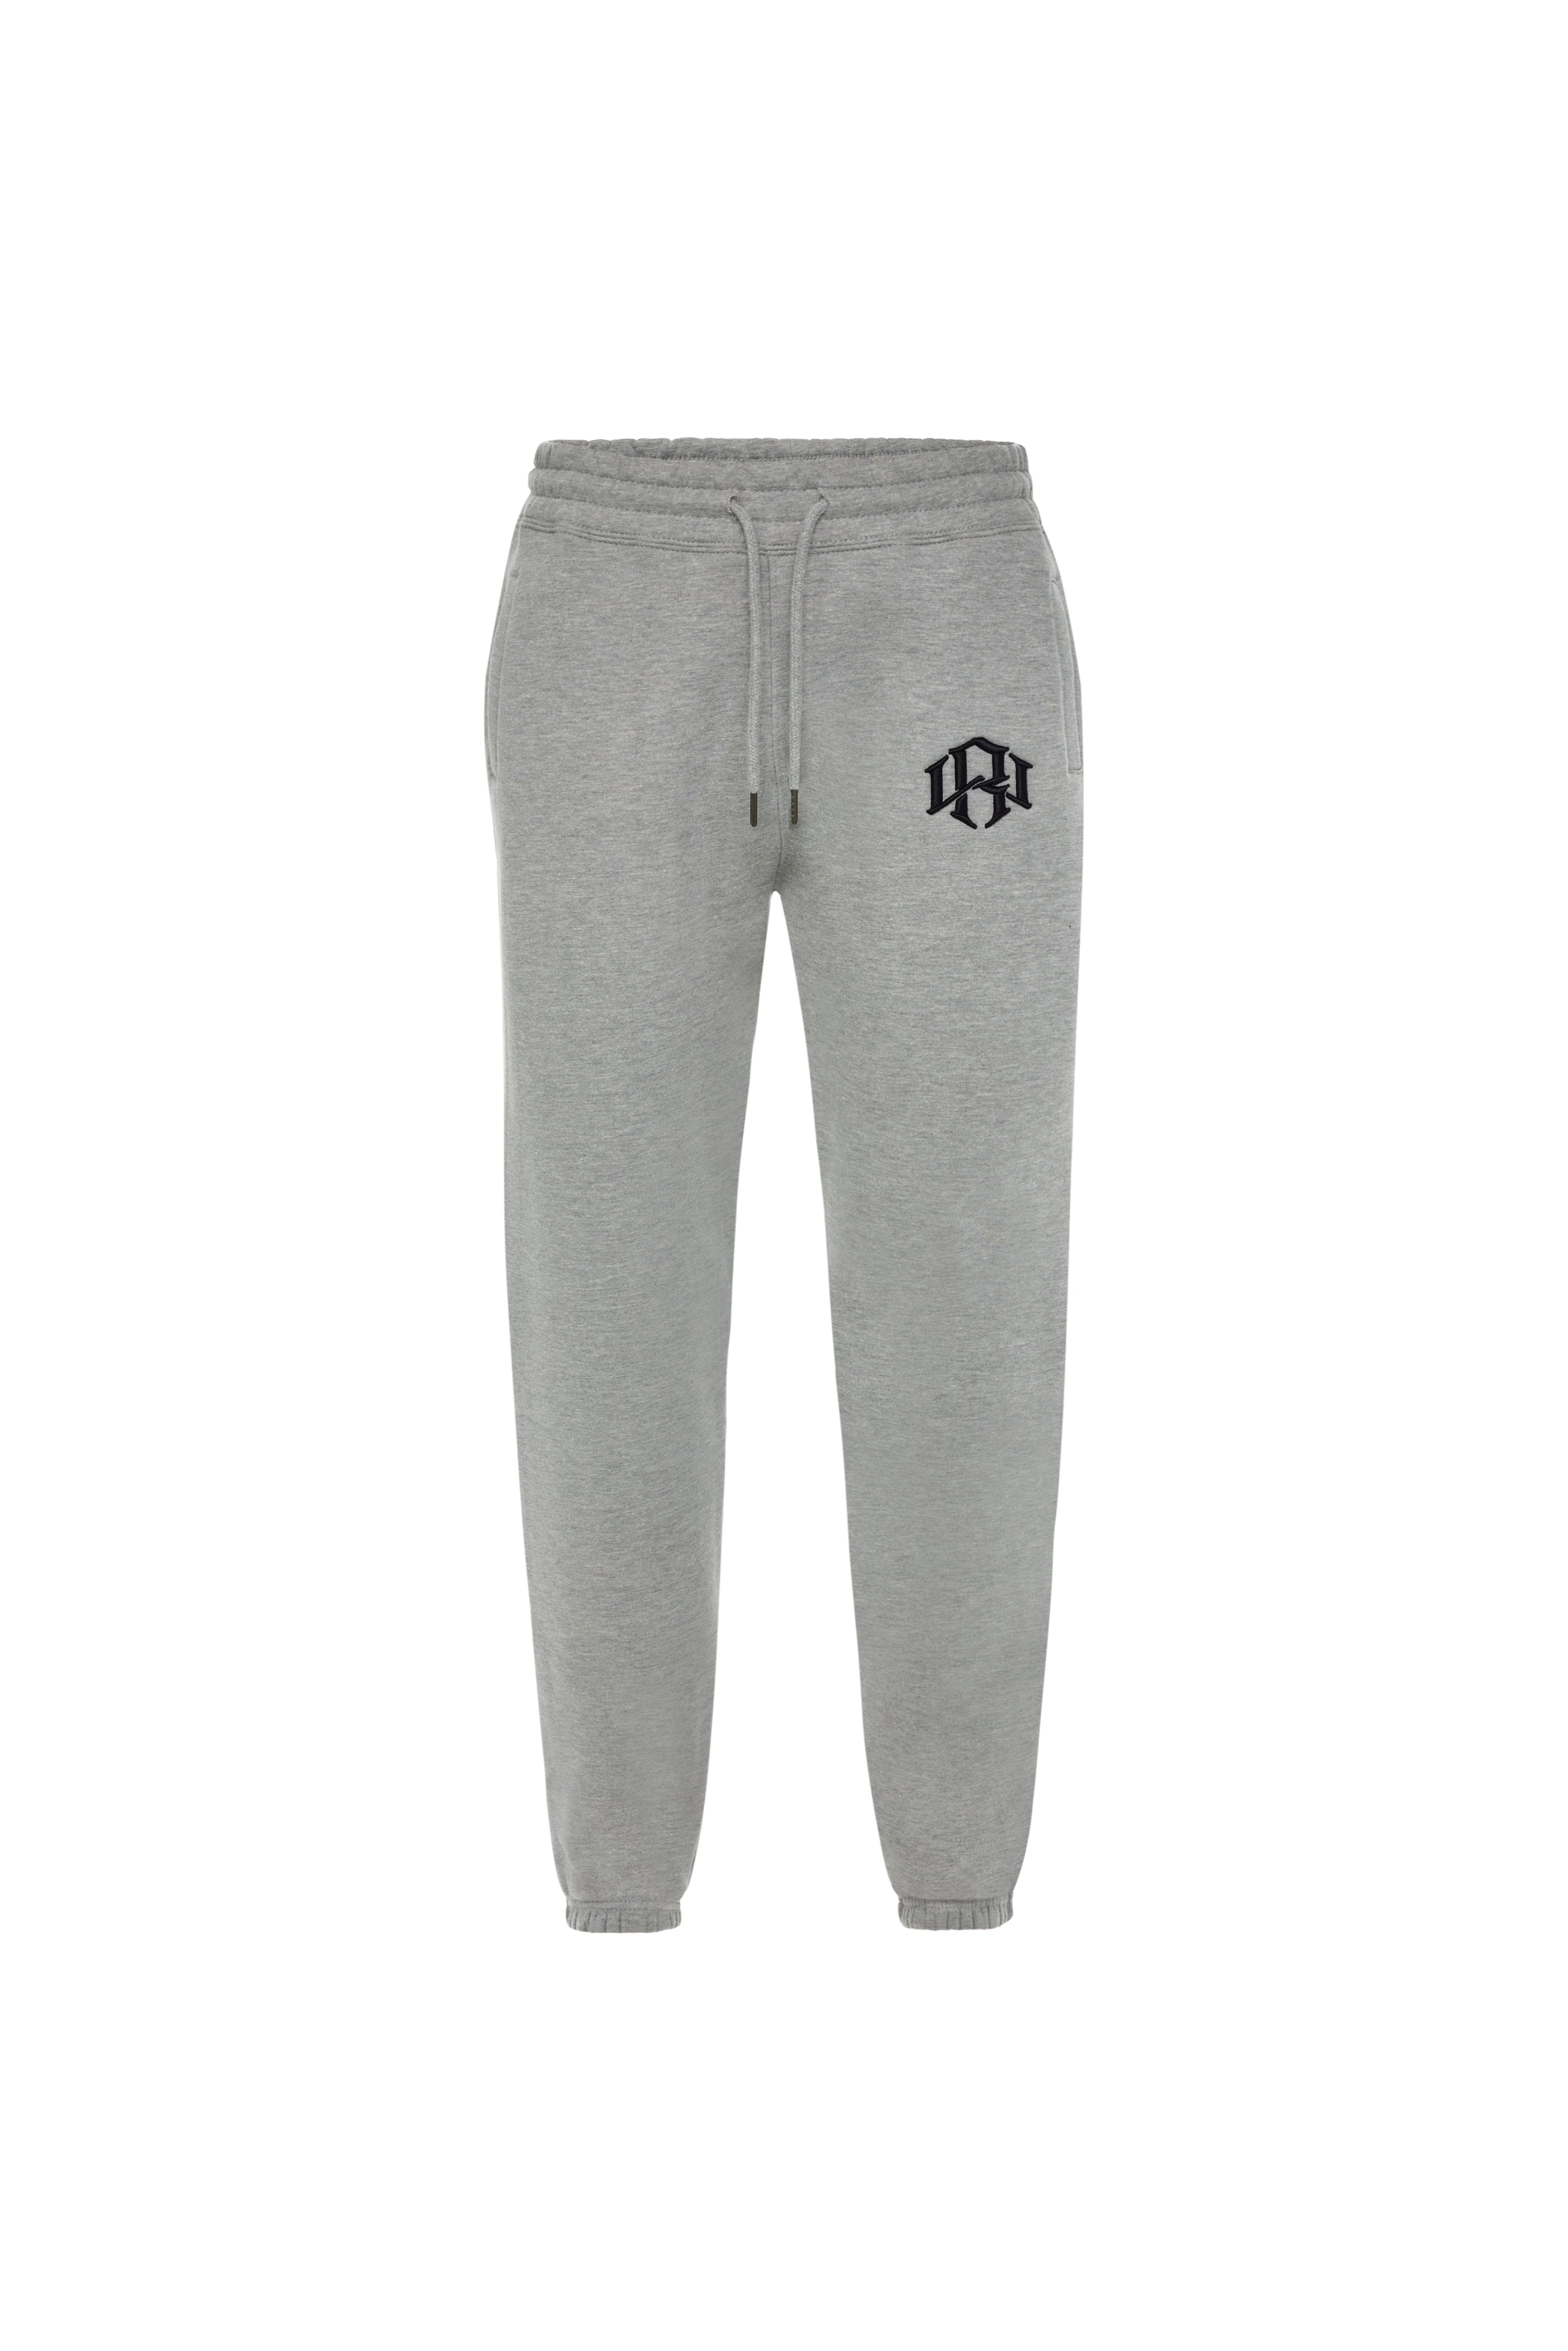 Heather Grey Sweatpants with USA Red Line Skull & Guns Riot Logo – Riot  Sports Gear